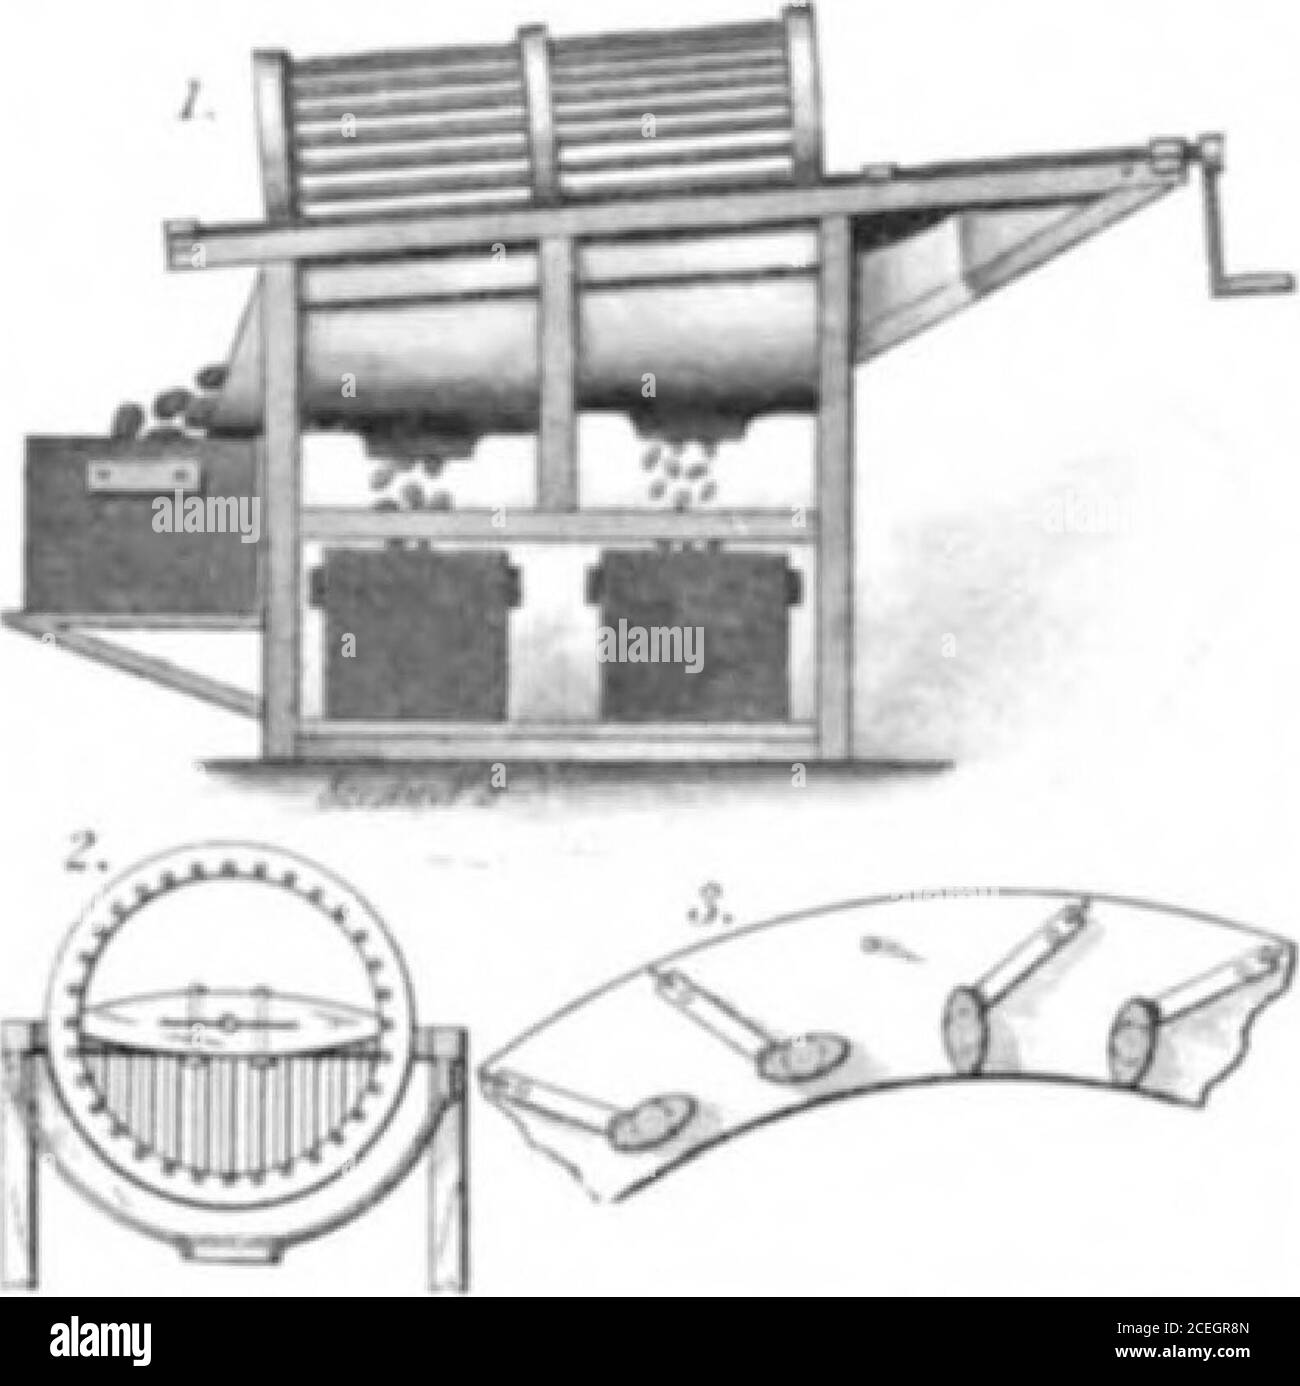 . Scientific American Volume 91 Number 16 (October 1904). mount-ed to rotate. The sorting cylinder consists of twoscreen sections formed by two series of parallel barsconnecting two outer head rings with a common in-termediate ring. In the first section of the cylinderthese bars are fixed, but in the other section, or thedischarge end of the cylinder, the bars are so ar-ranged that they can be adjusted to increase or de-crease the screen openings formed between them. Thisarrangement is indicated in Fig. 3. The bars are ovalin cross section, and turn in bearings in the head ringand intermediate Stock Photo